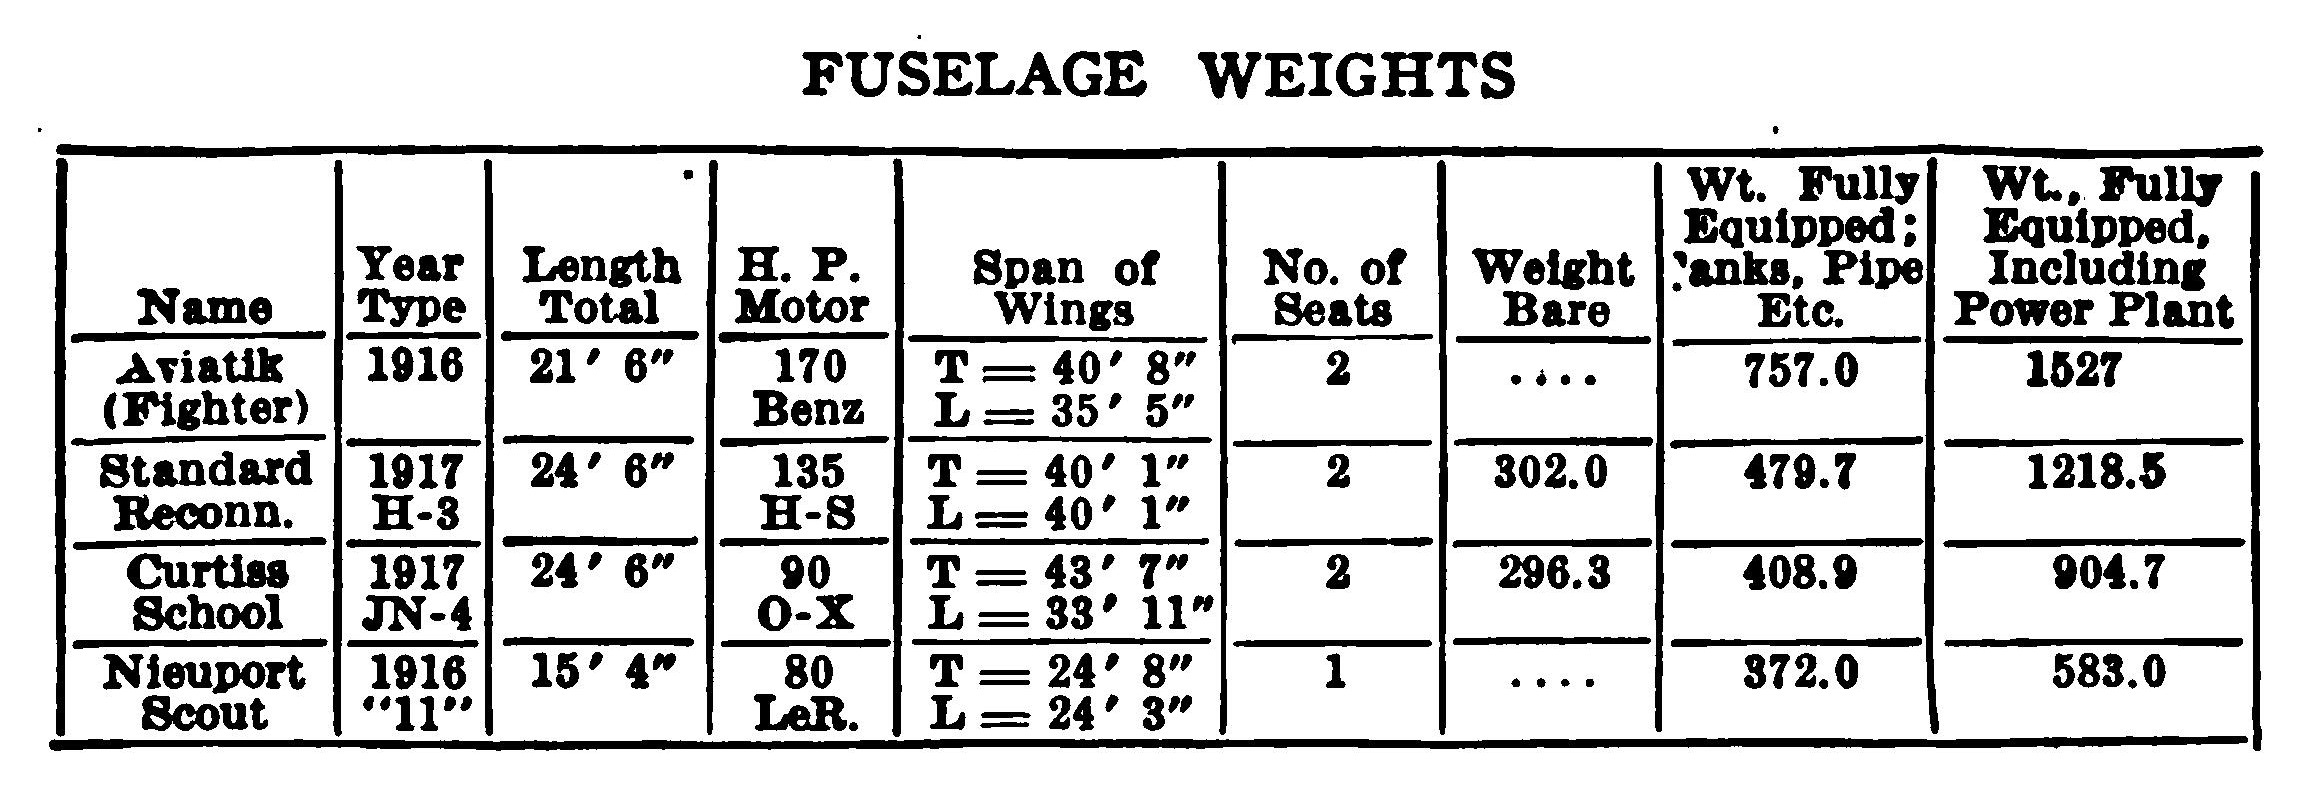 Fuselage Weights Table